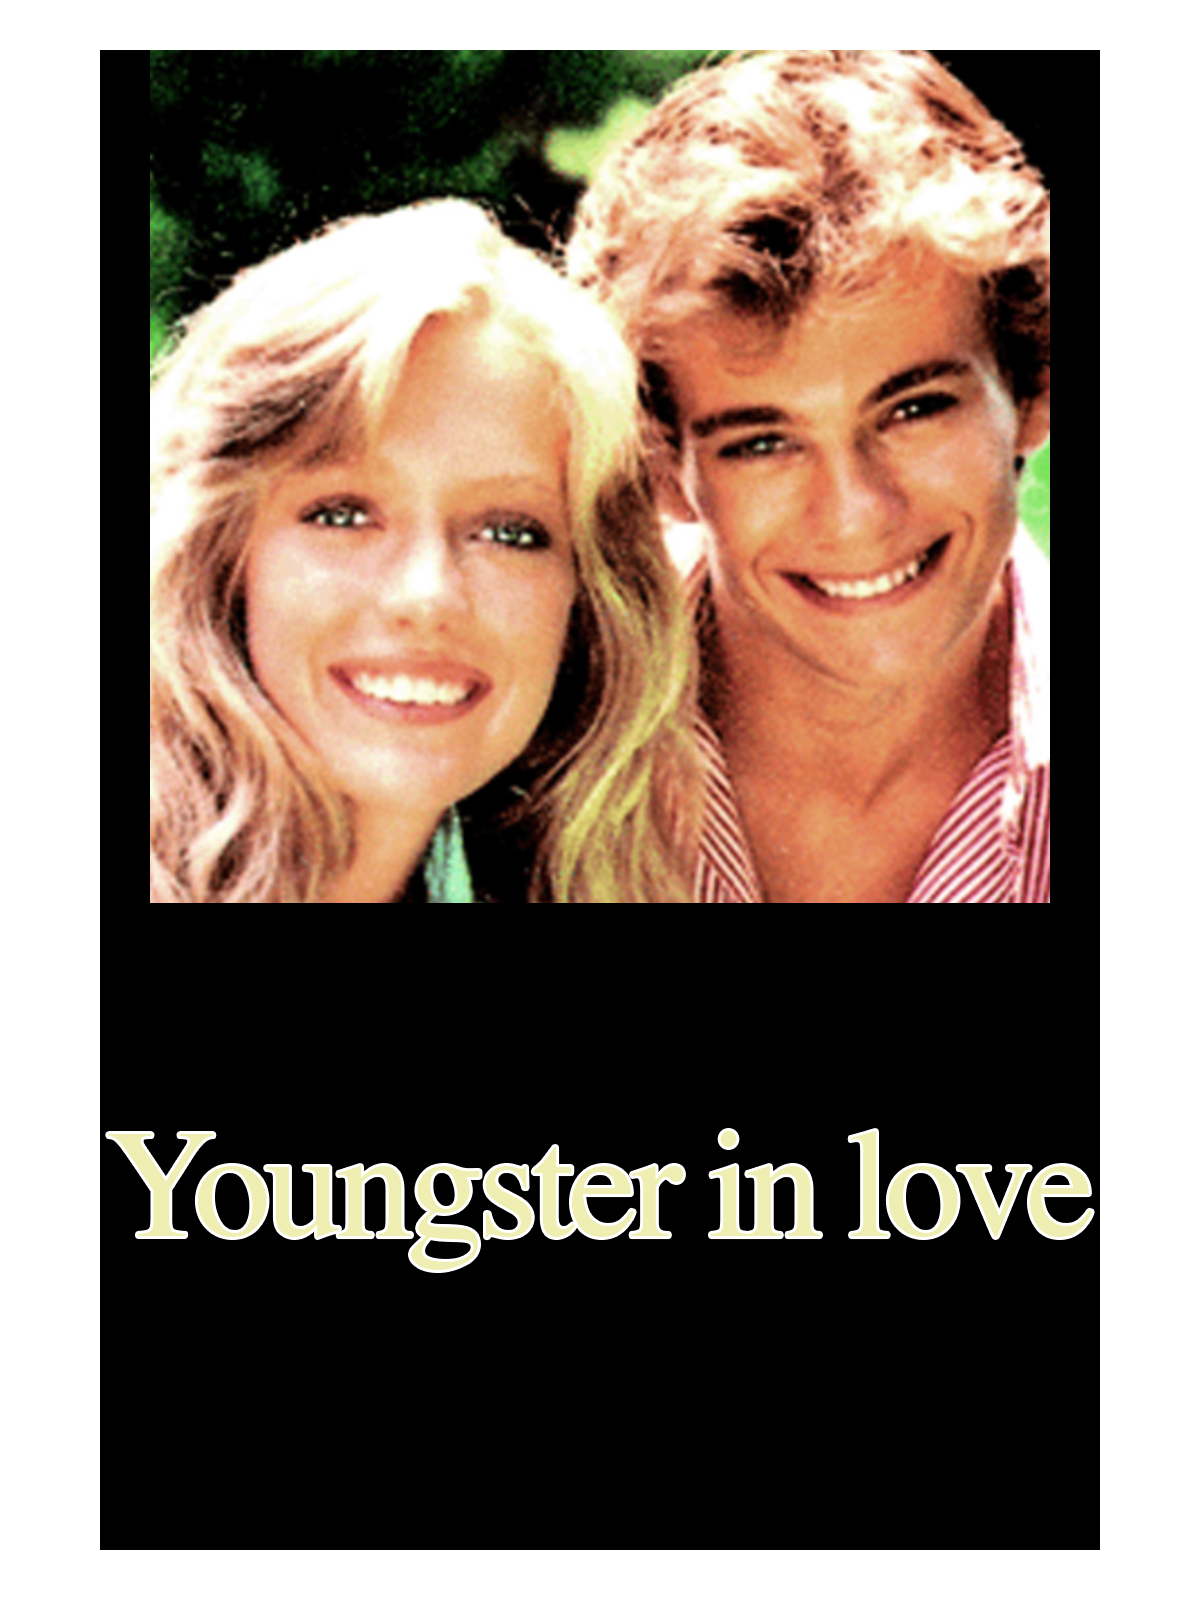 Youngster in love